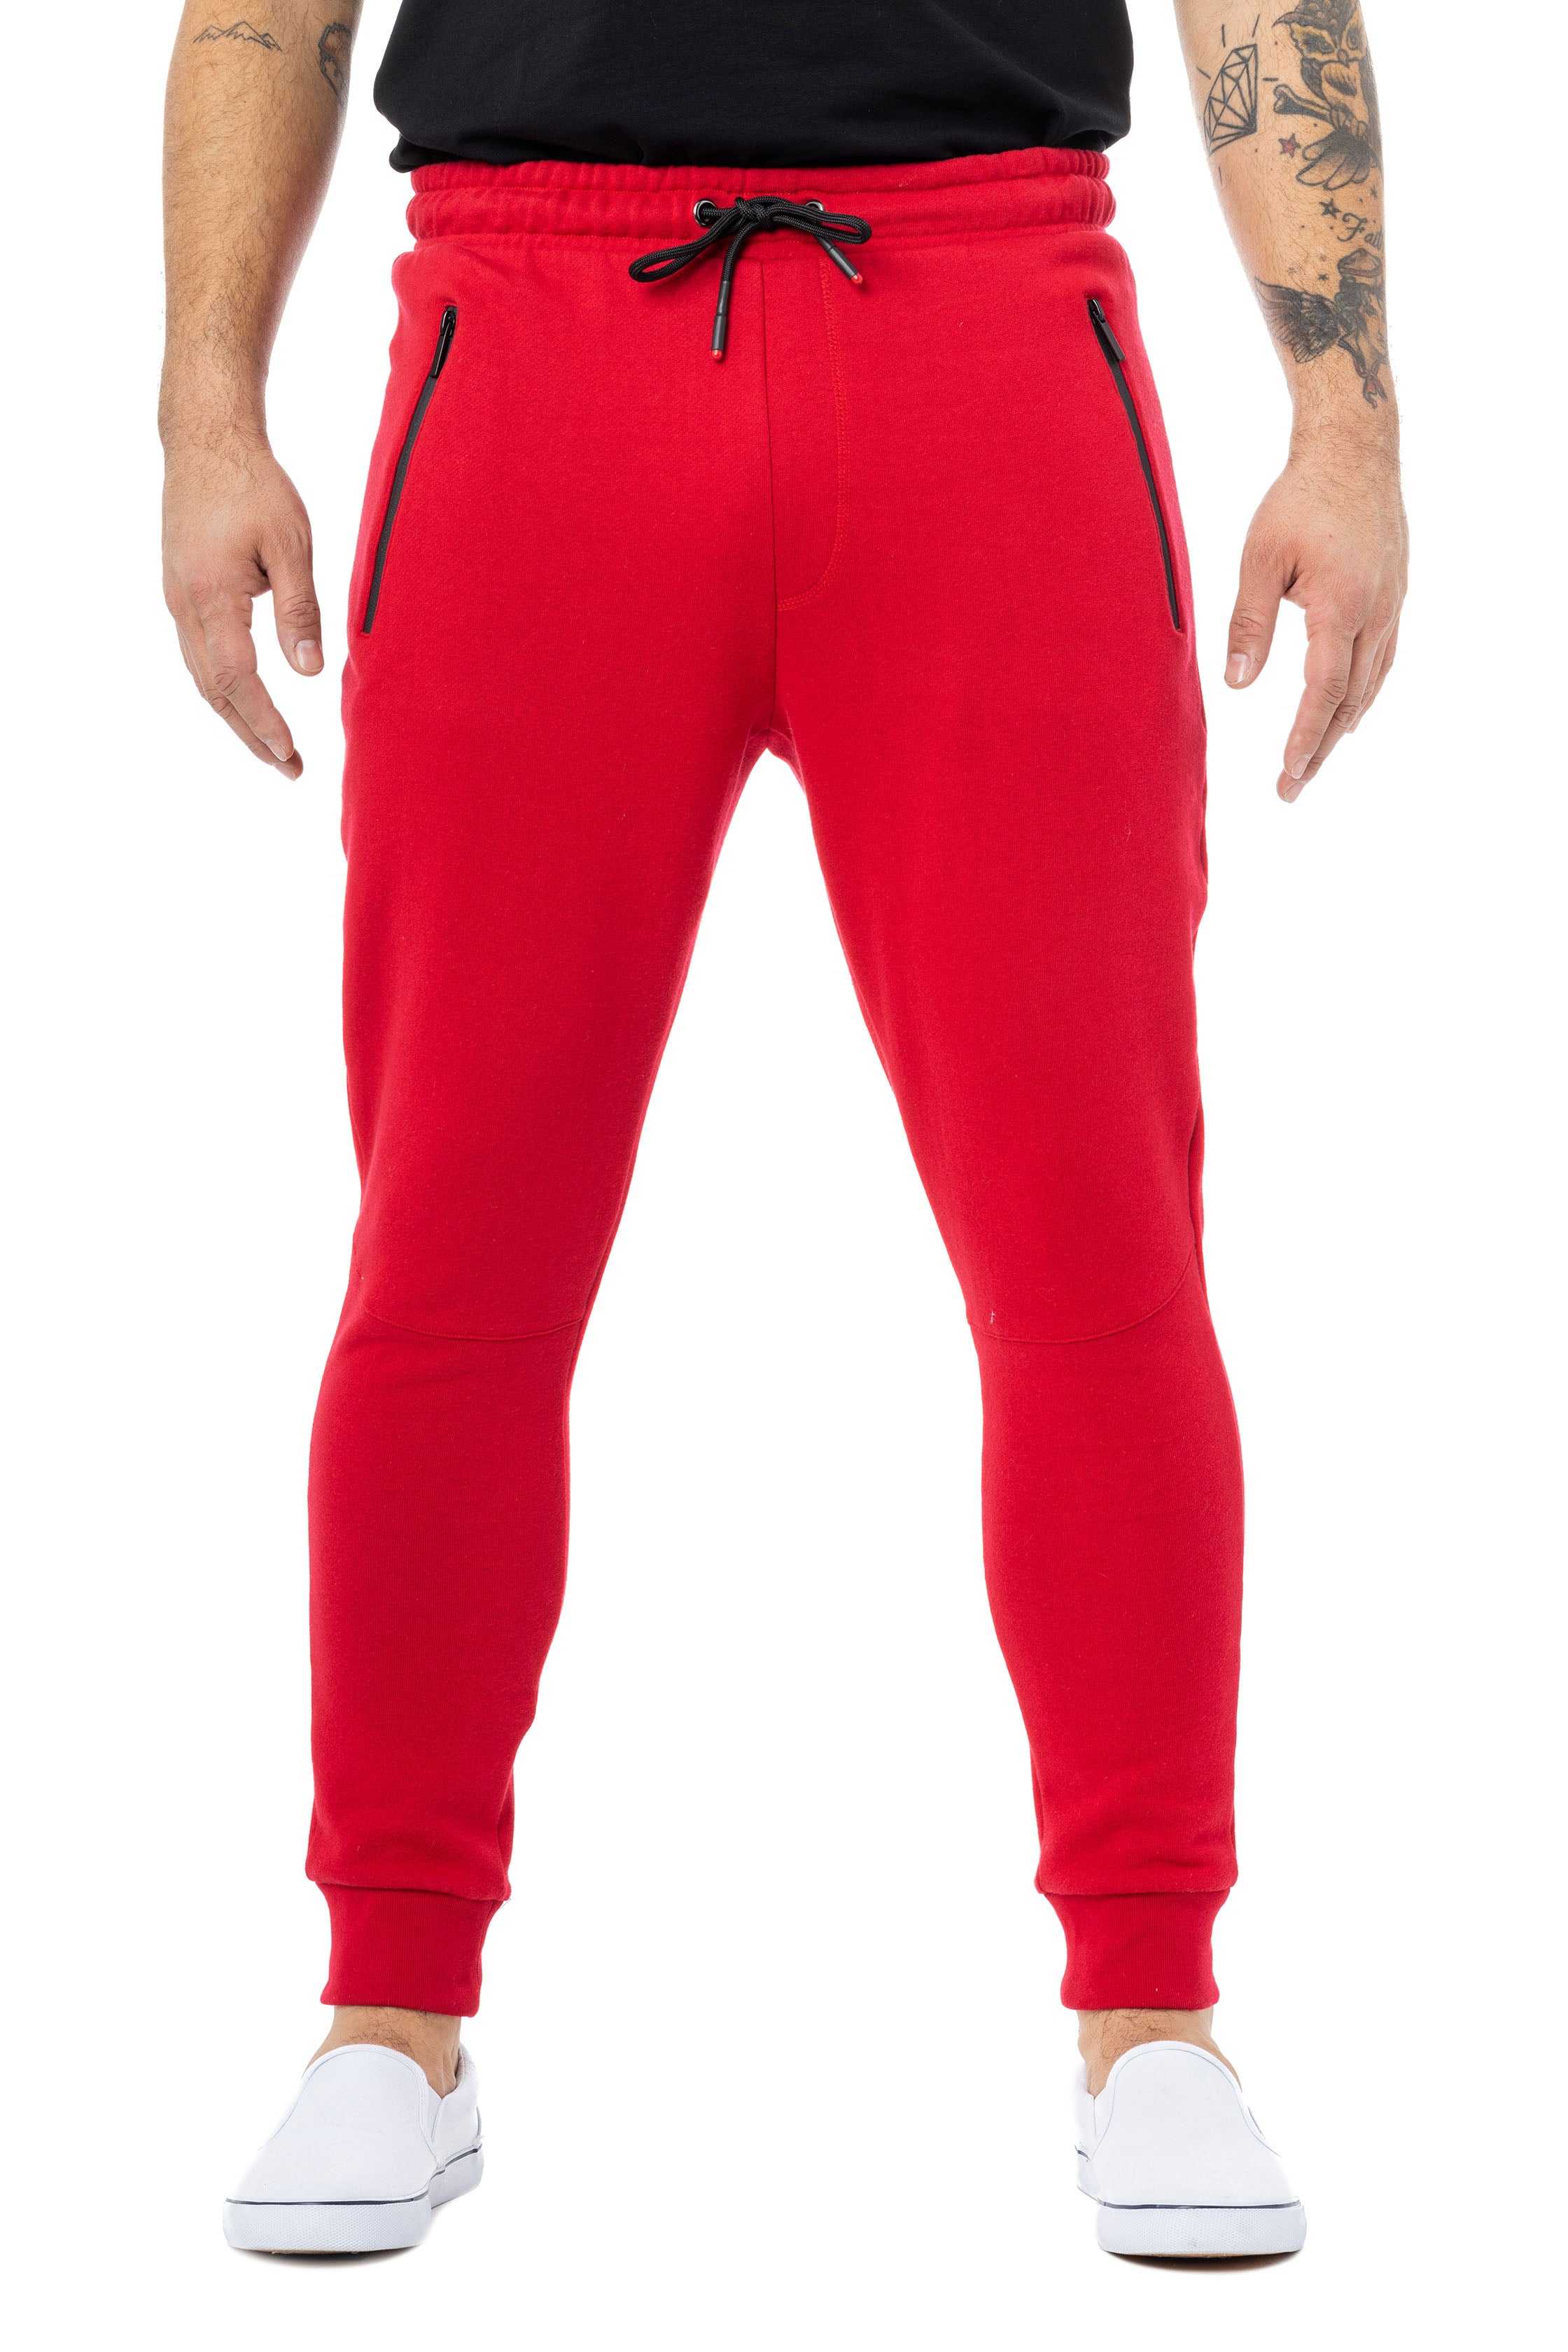 YUHAOTIN Mens Joggers with Zipper Pockets Red Mens Cotton and